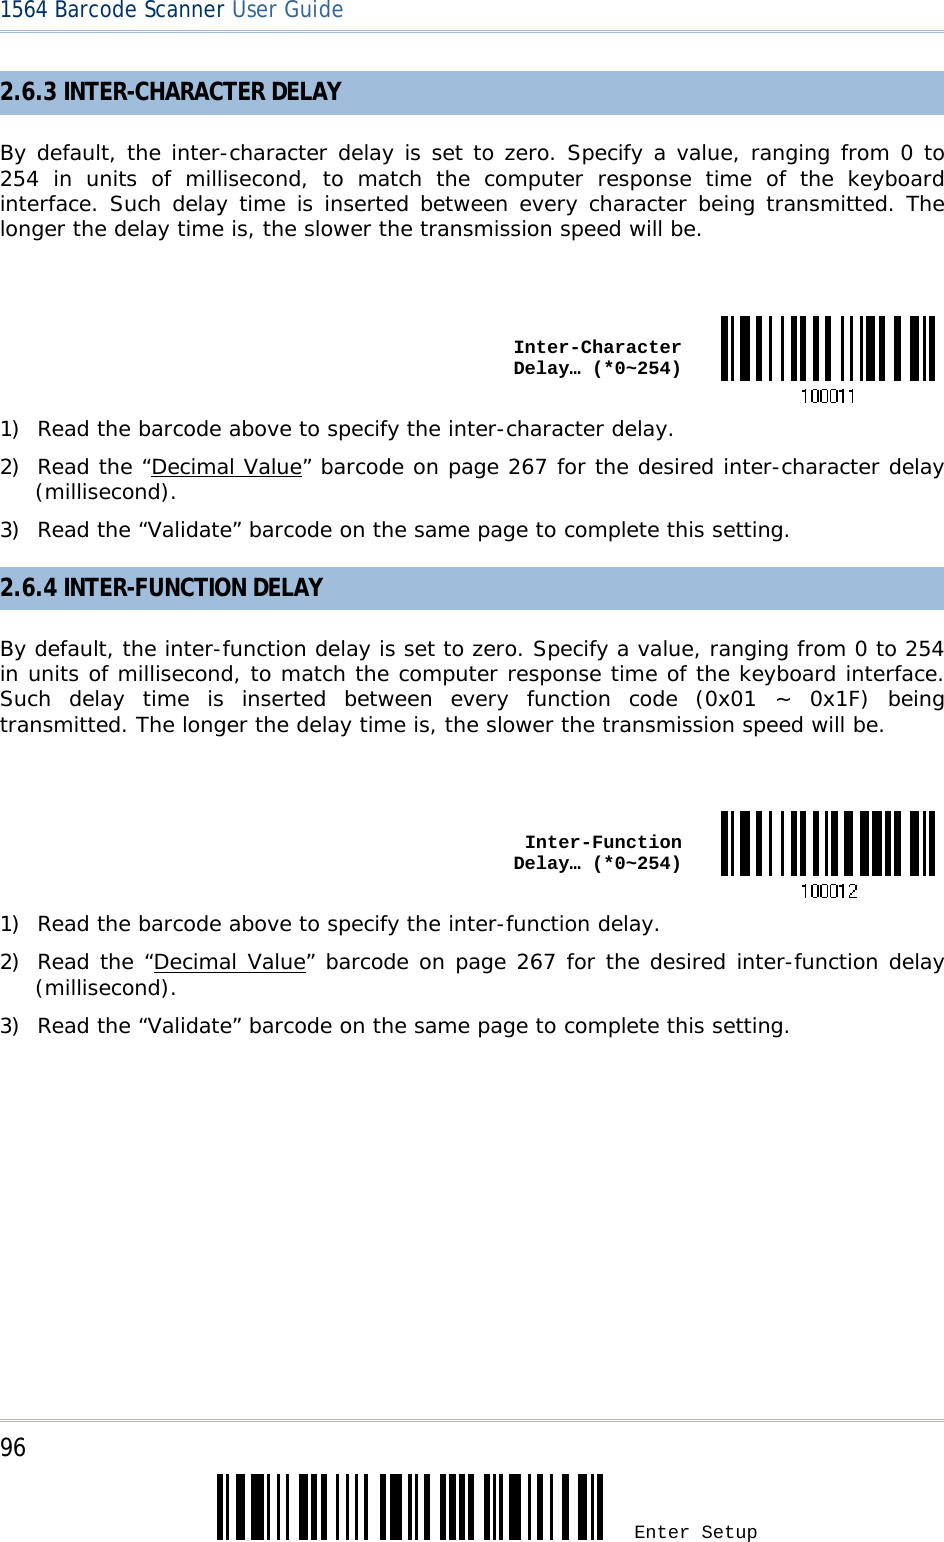 96 Enter Setup 1564 Barcode Scanner User Guide  2.6.3 INTER-CHARACTER DELAY By default, the inter-character delay is set to zero. Specify a value, ranging from 0 to 254 in units of millisecond, to match the computer response time of the keyboard interface. Such delay time is inserted between every character being transmitted. The longer the delay time is, the slower the transmission speed will be.   Inter-Character Delay… (*0~254)1) Read the barcode above to specify the inter-character delay. 2) Read the “Decimal Value” barcode on page 267 for the desired inter-character delay (millisecond).  3) Read the “Validate” barcode on the same page to complete this setting. 2.6.4 INTER-FUNCTION DELAY By default, the inter-function delay is set to zero. Specify a value, ranging from 0 to 254 in units of millisecond, to match the computer response time of the keyboard interface. Such delay time is inserted between every function code (0x01 ~ 0x1F) being transmitted. The longer the delay time is, the slower the transmission speed will be.   Inter-Function Delay… (*0~254)1) Read the barcode above to specify the inter-function delay. 2) Read the “Decimal Value” barcode on page 267 for the desired inter-function delay (millisecond).  3) Read the “Validate” barcode on the same page to complete this setting. 